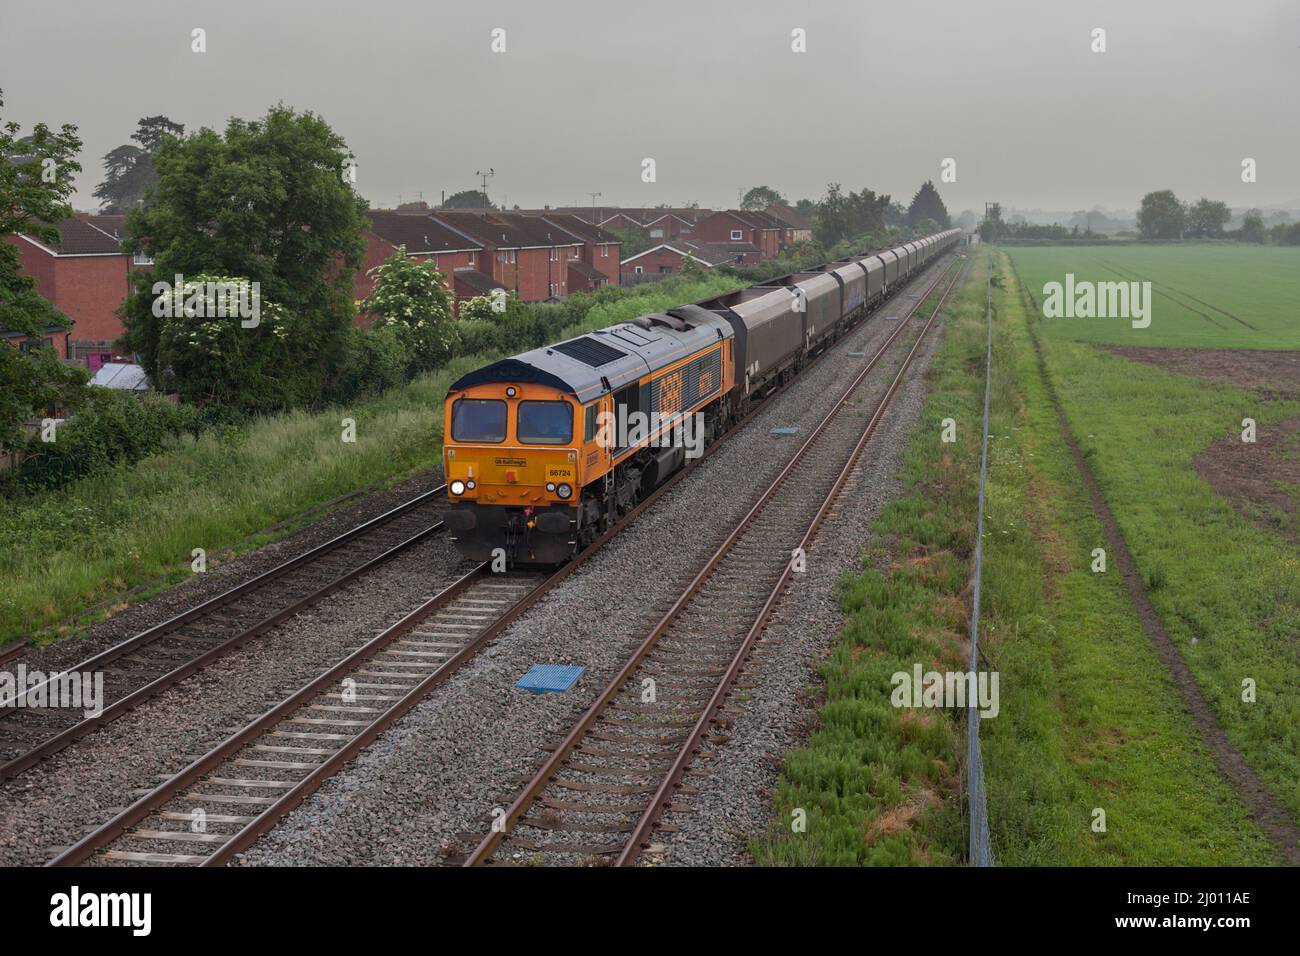 GB Railfreight  class 66 locomotive 66724 passing Ashchurch for Tewkesbury with a freight train of empty coal wagons Stock Photo